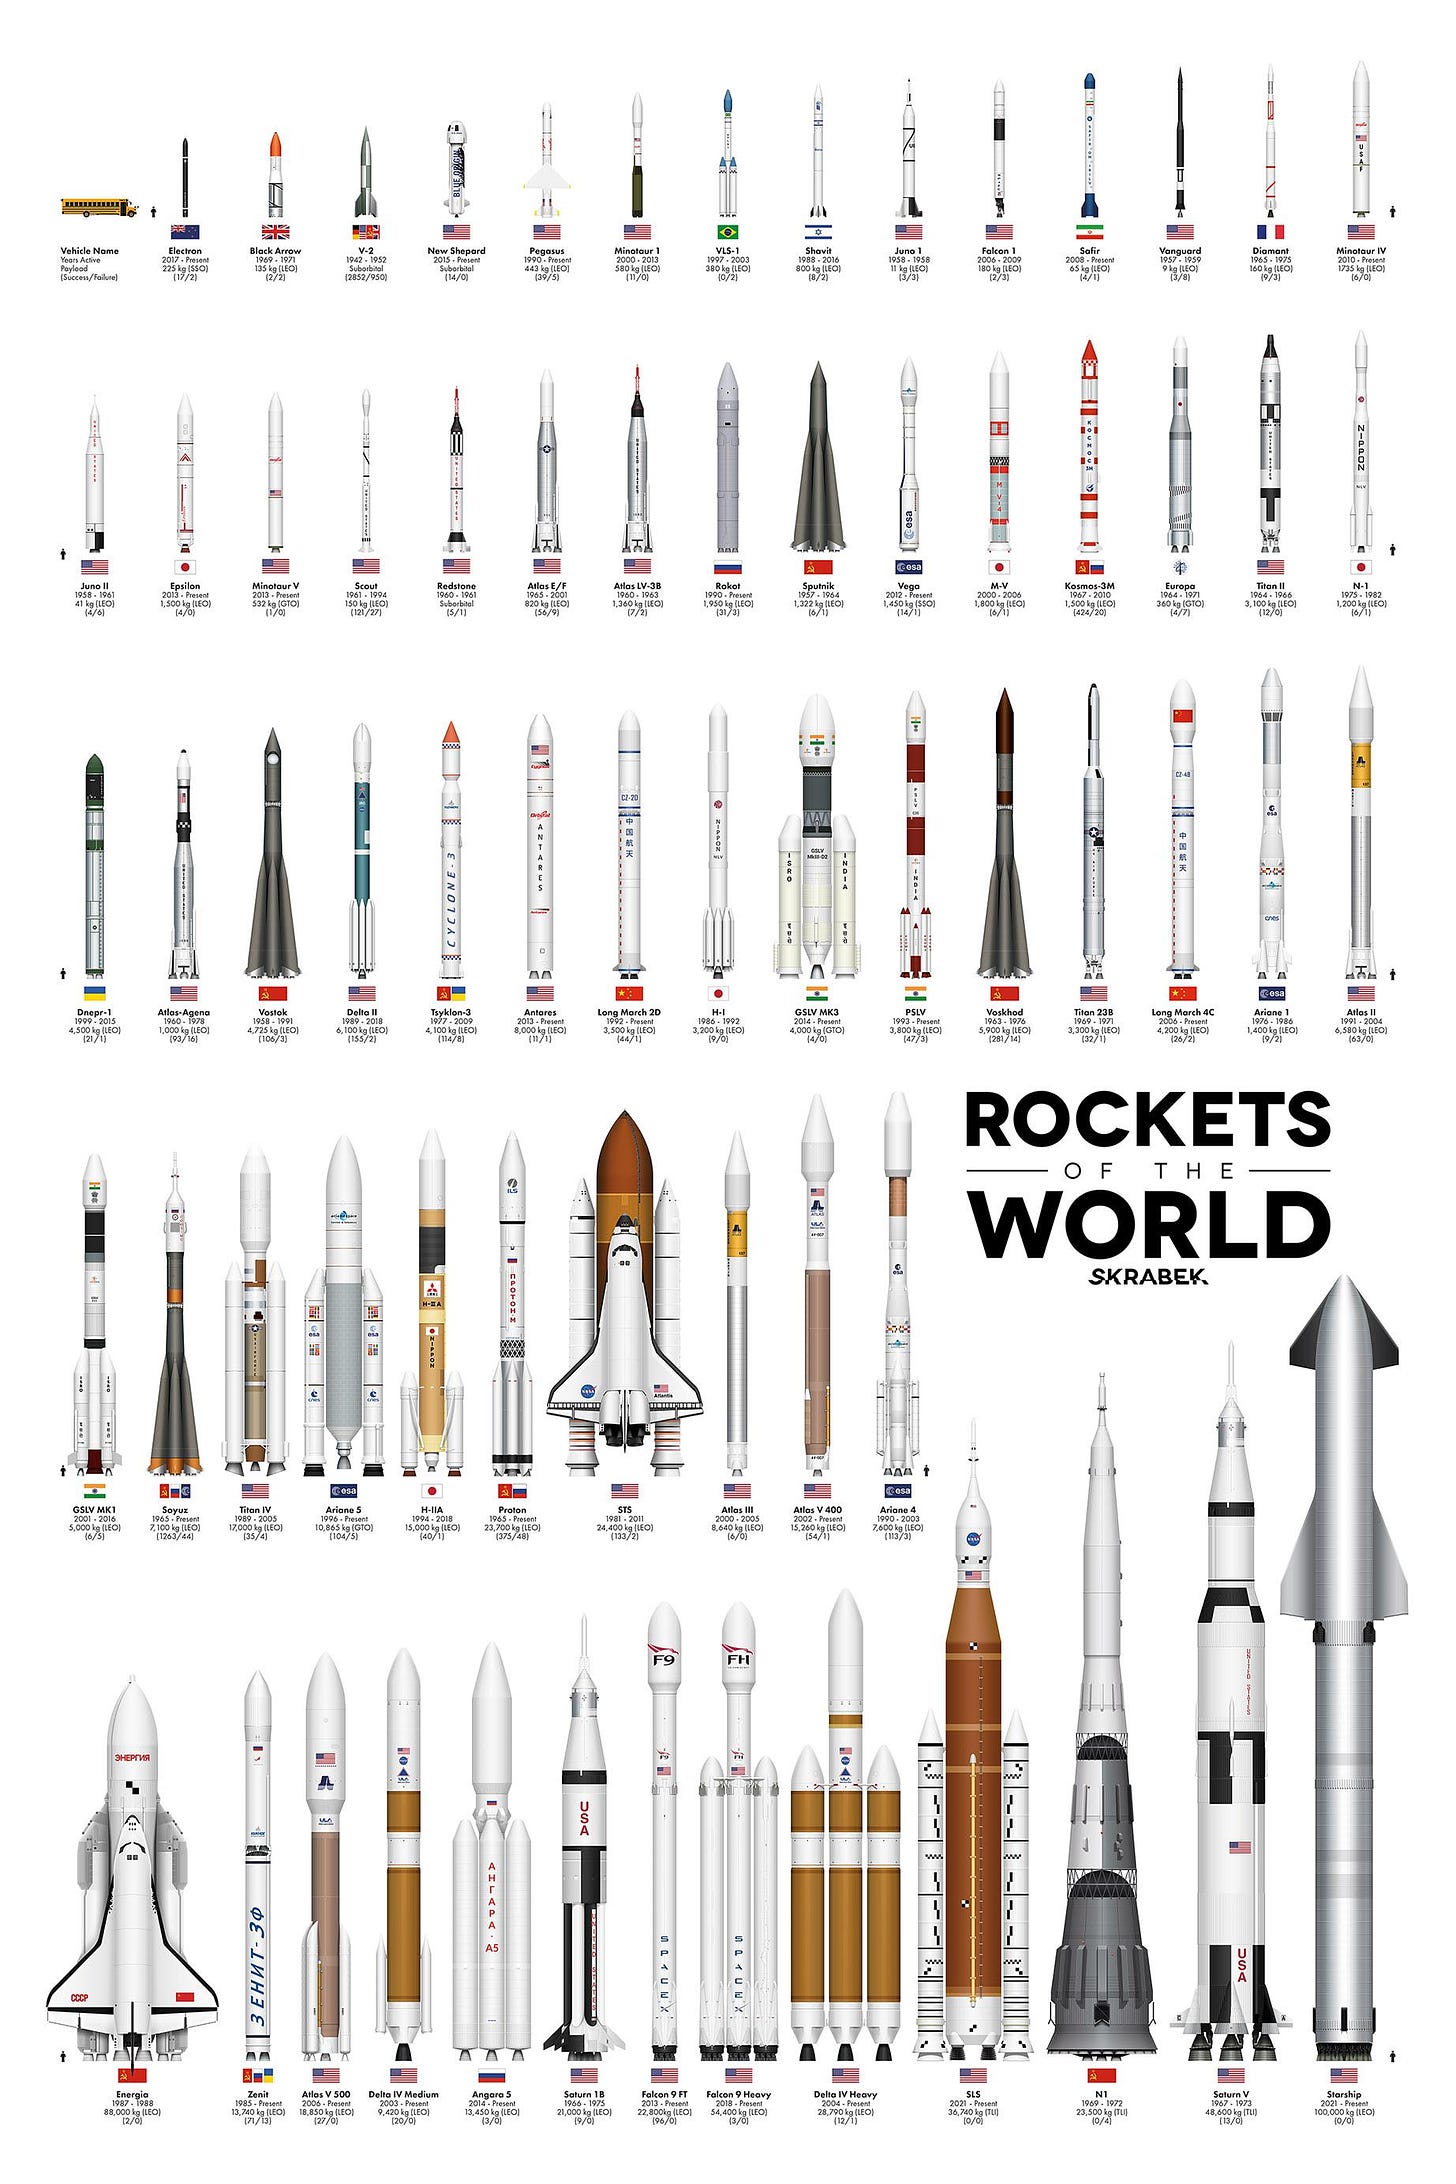 Comparing the Size of The World’s Rockets Full